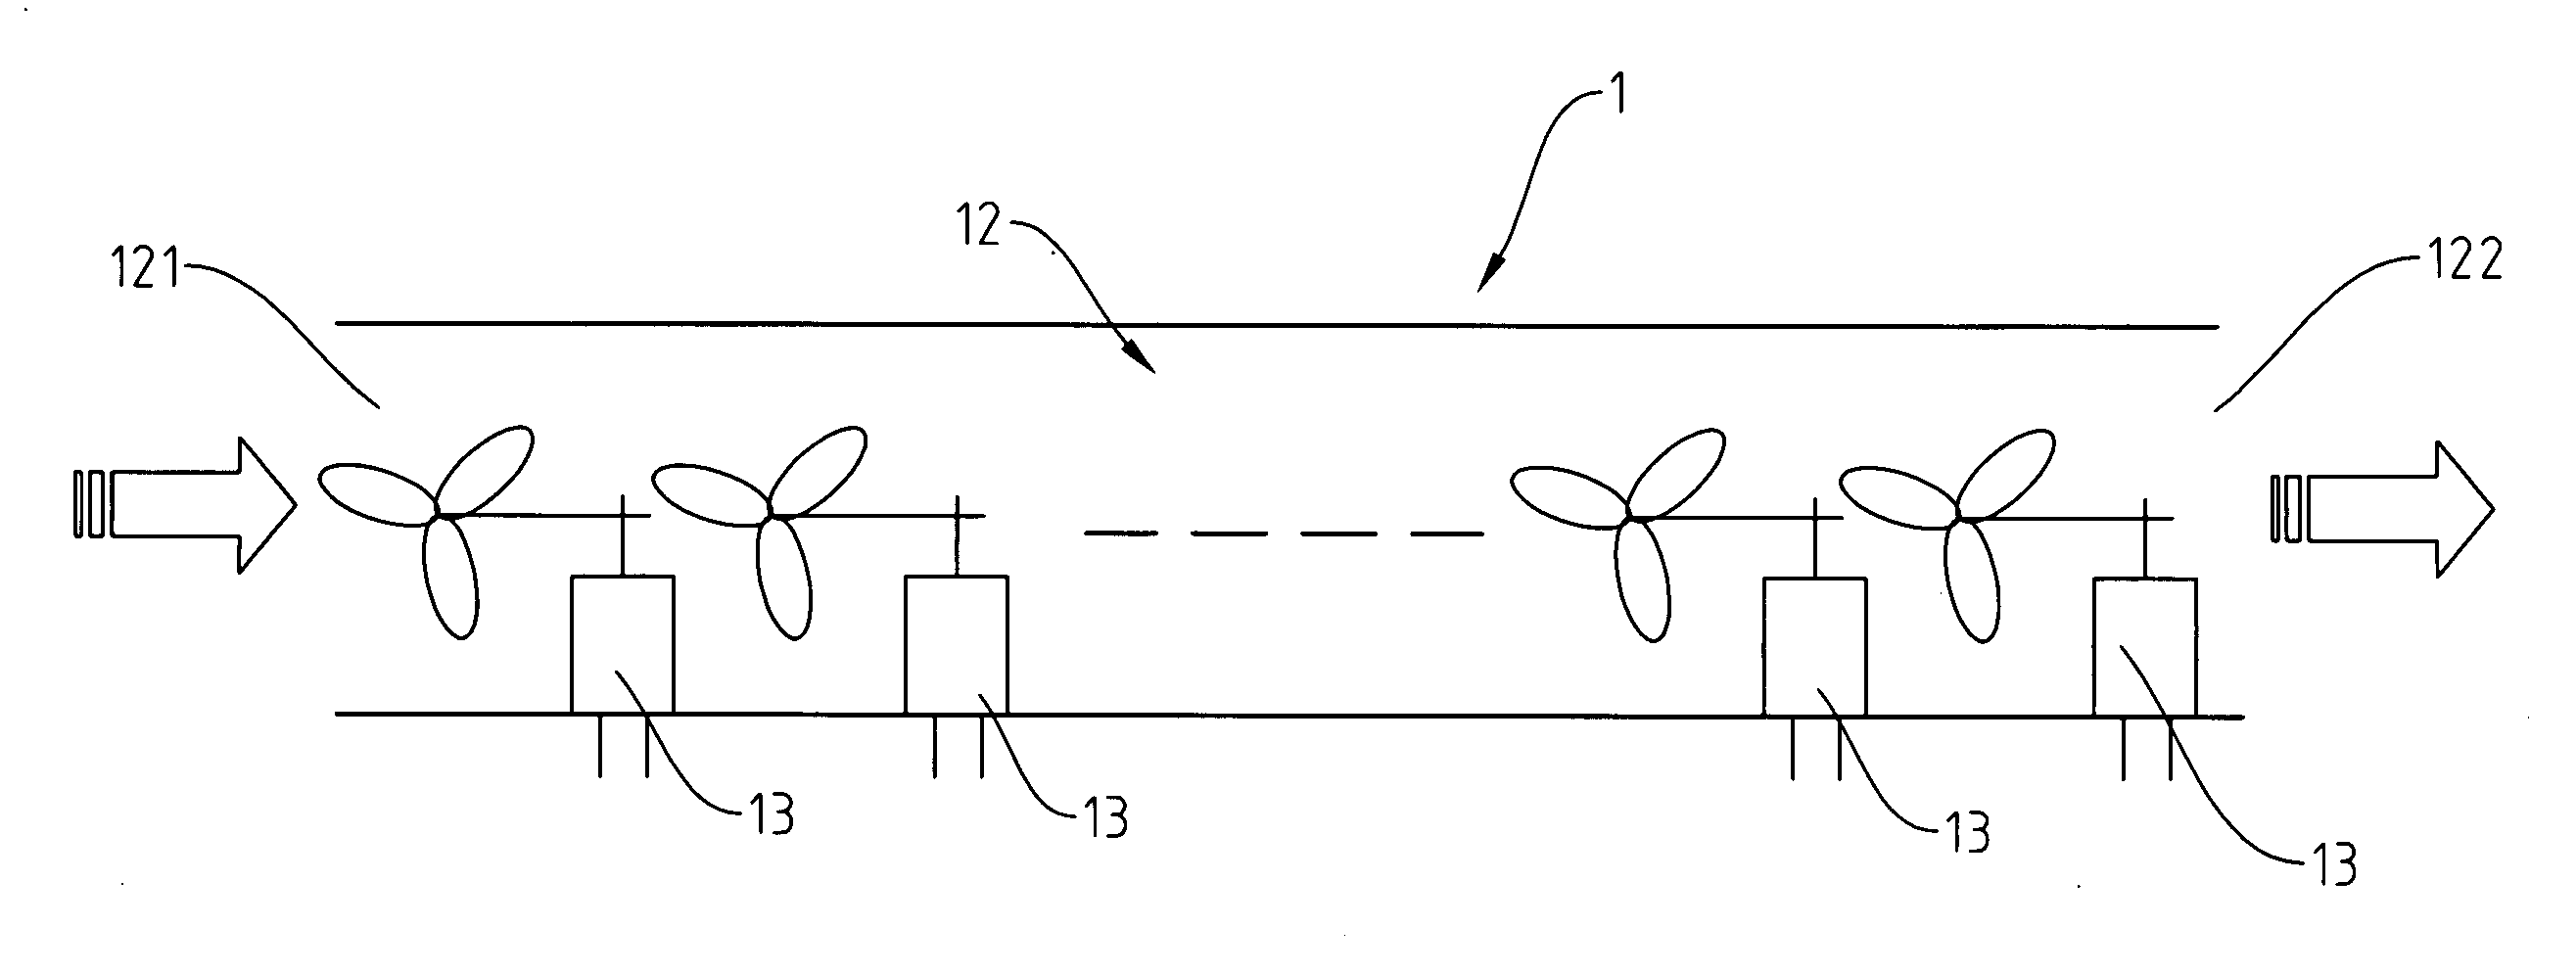 Wind-driven power generation device for electric vehicle